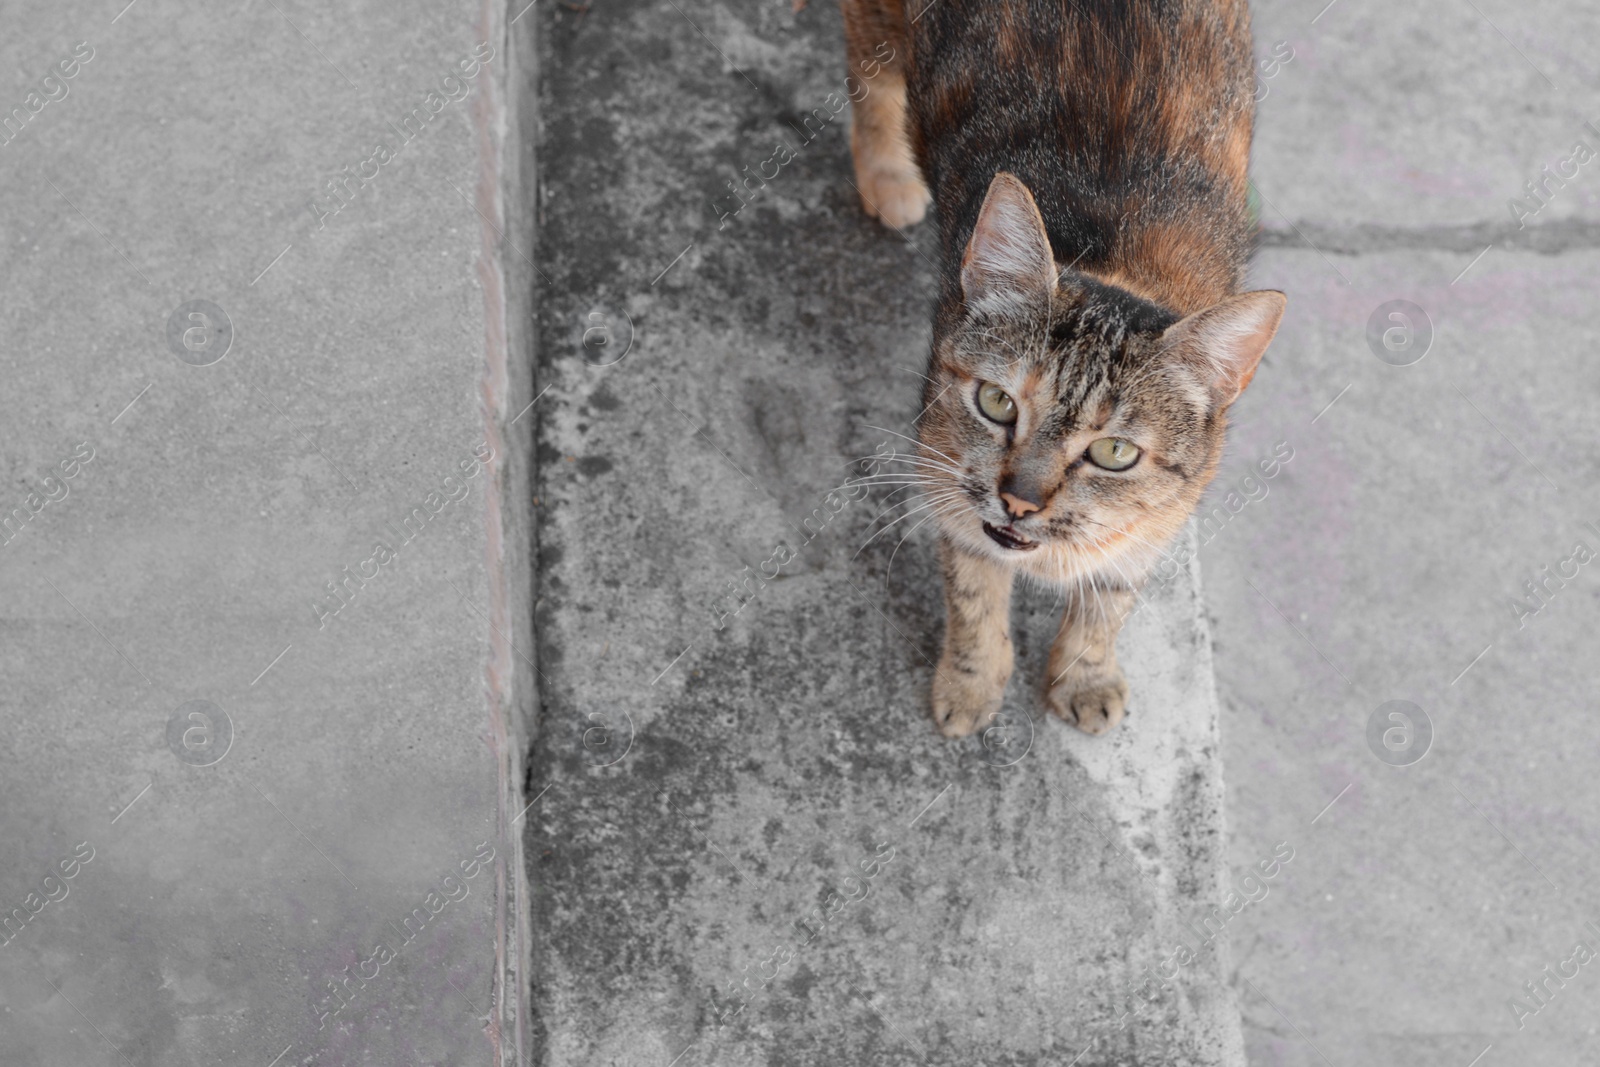 Photo of Cute stray cat on road outdoors, space for text